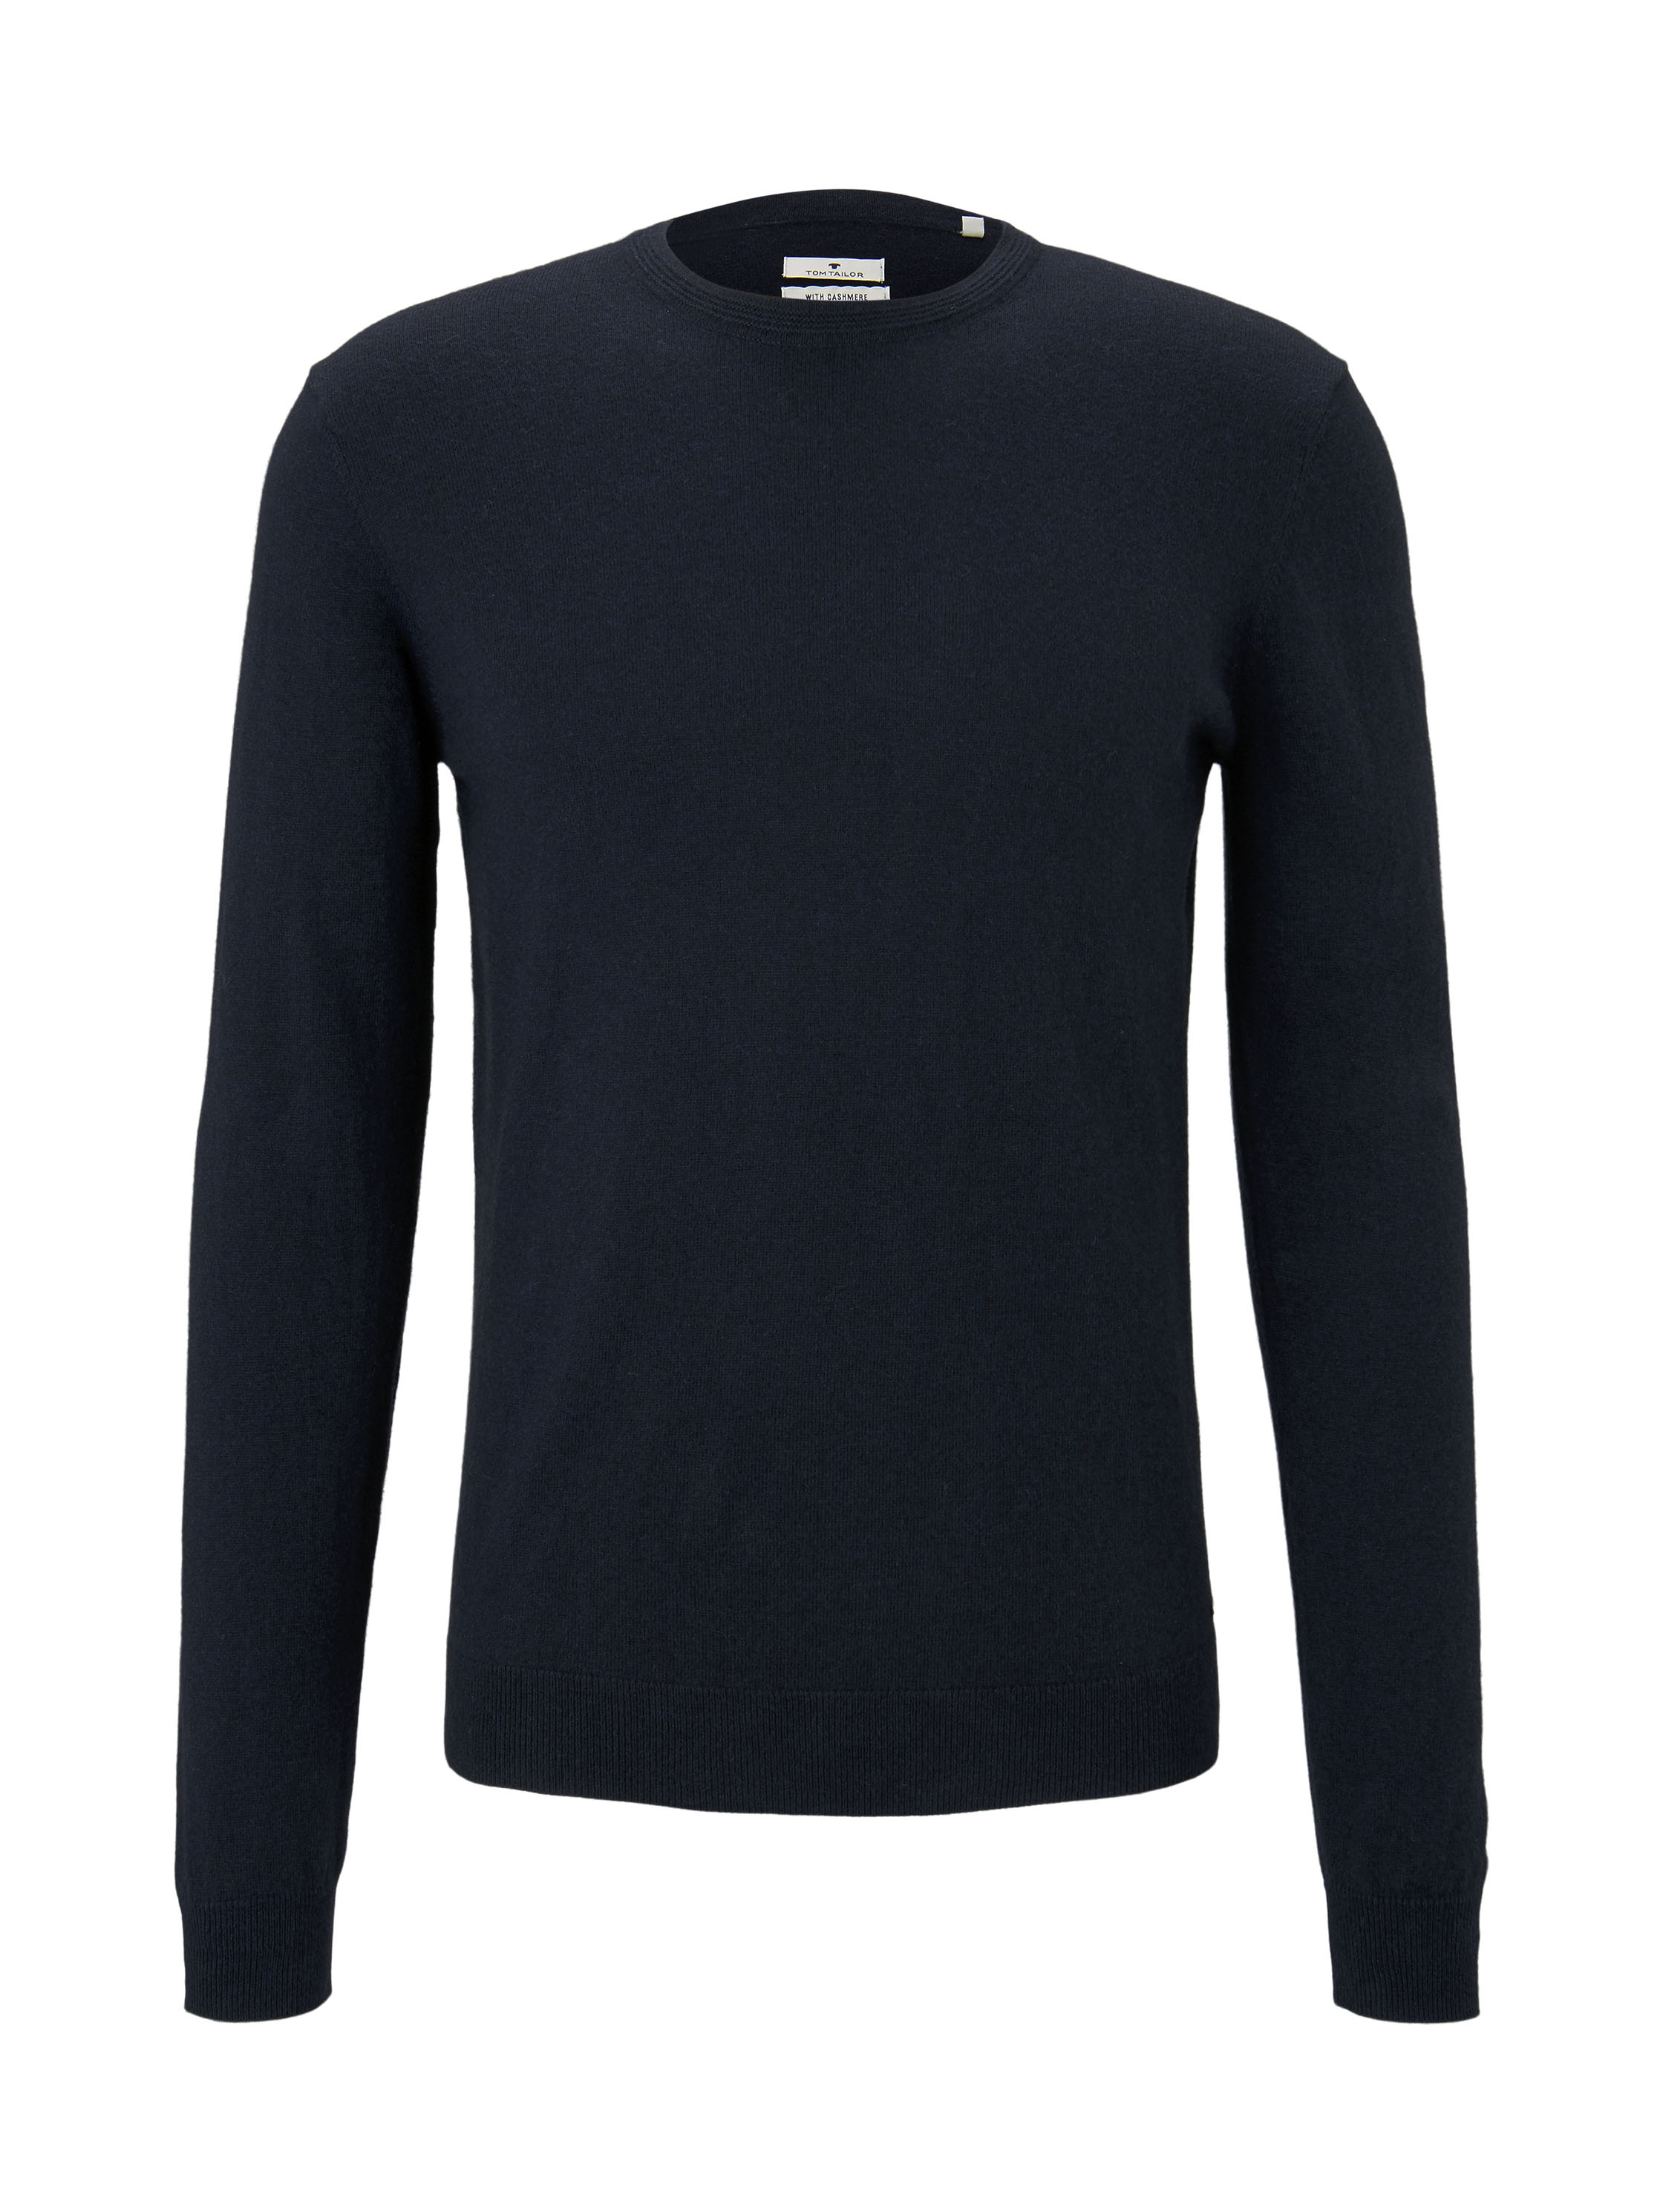 cosy cashmere blend sweater, Knitted Navy Melange          Blue